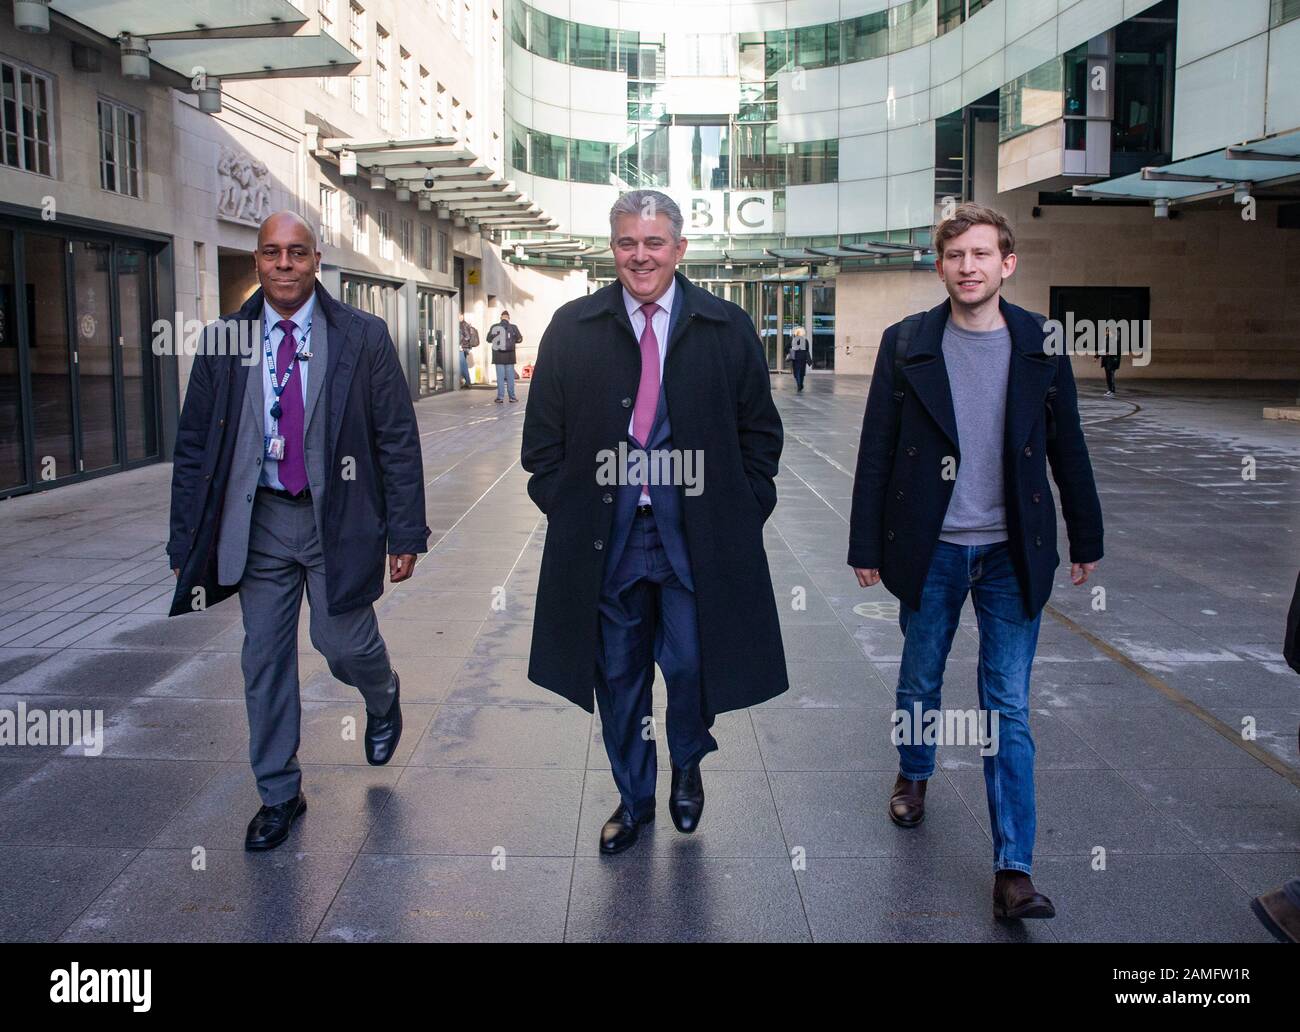 Brandon Lewis(Centre), Minister of State for Security and Deputy for EU Exit and No Deal Preparation, leaves the BBC after ' The Andrew Marr Show'. Stock Photo